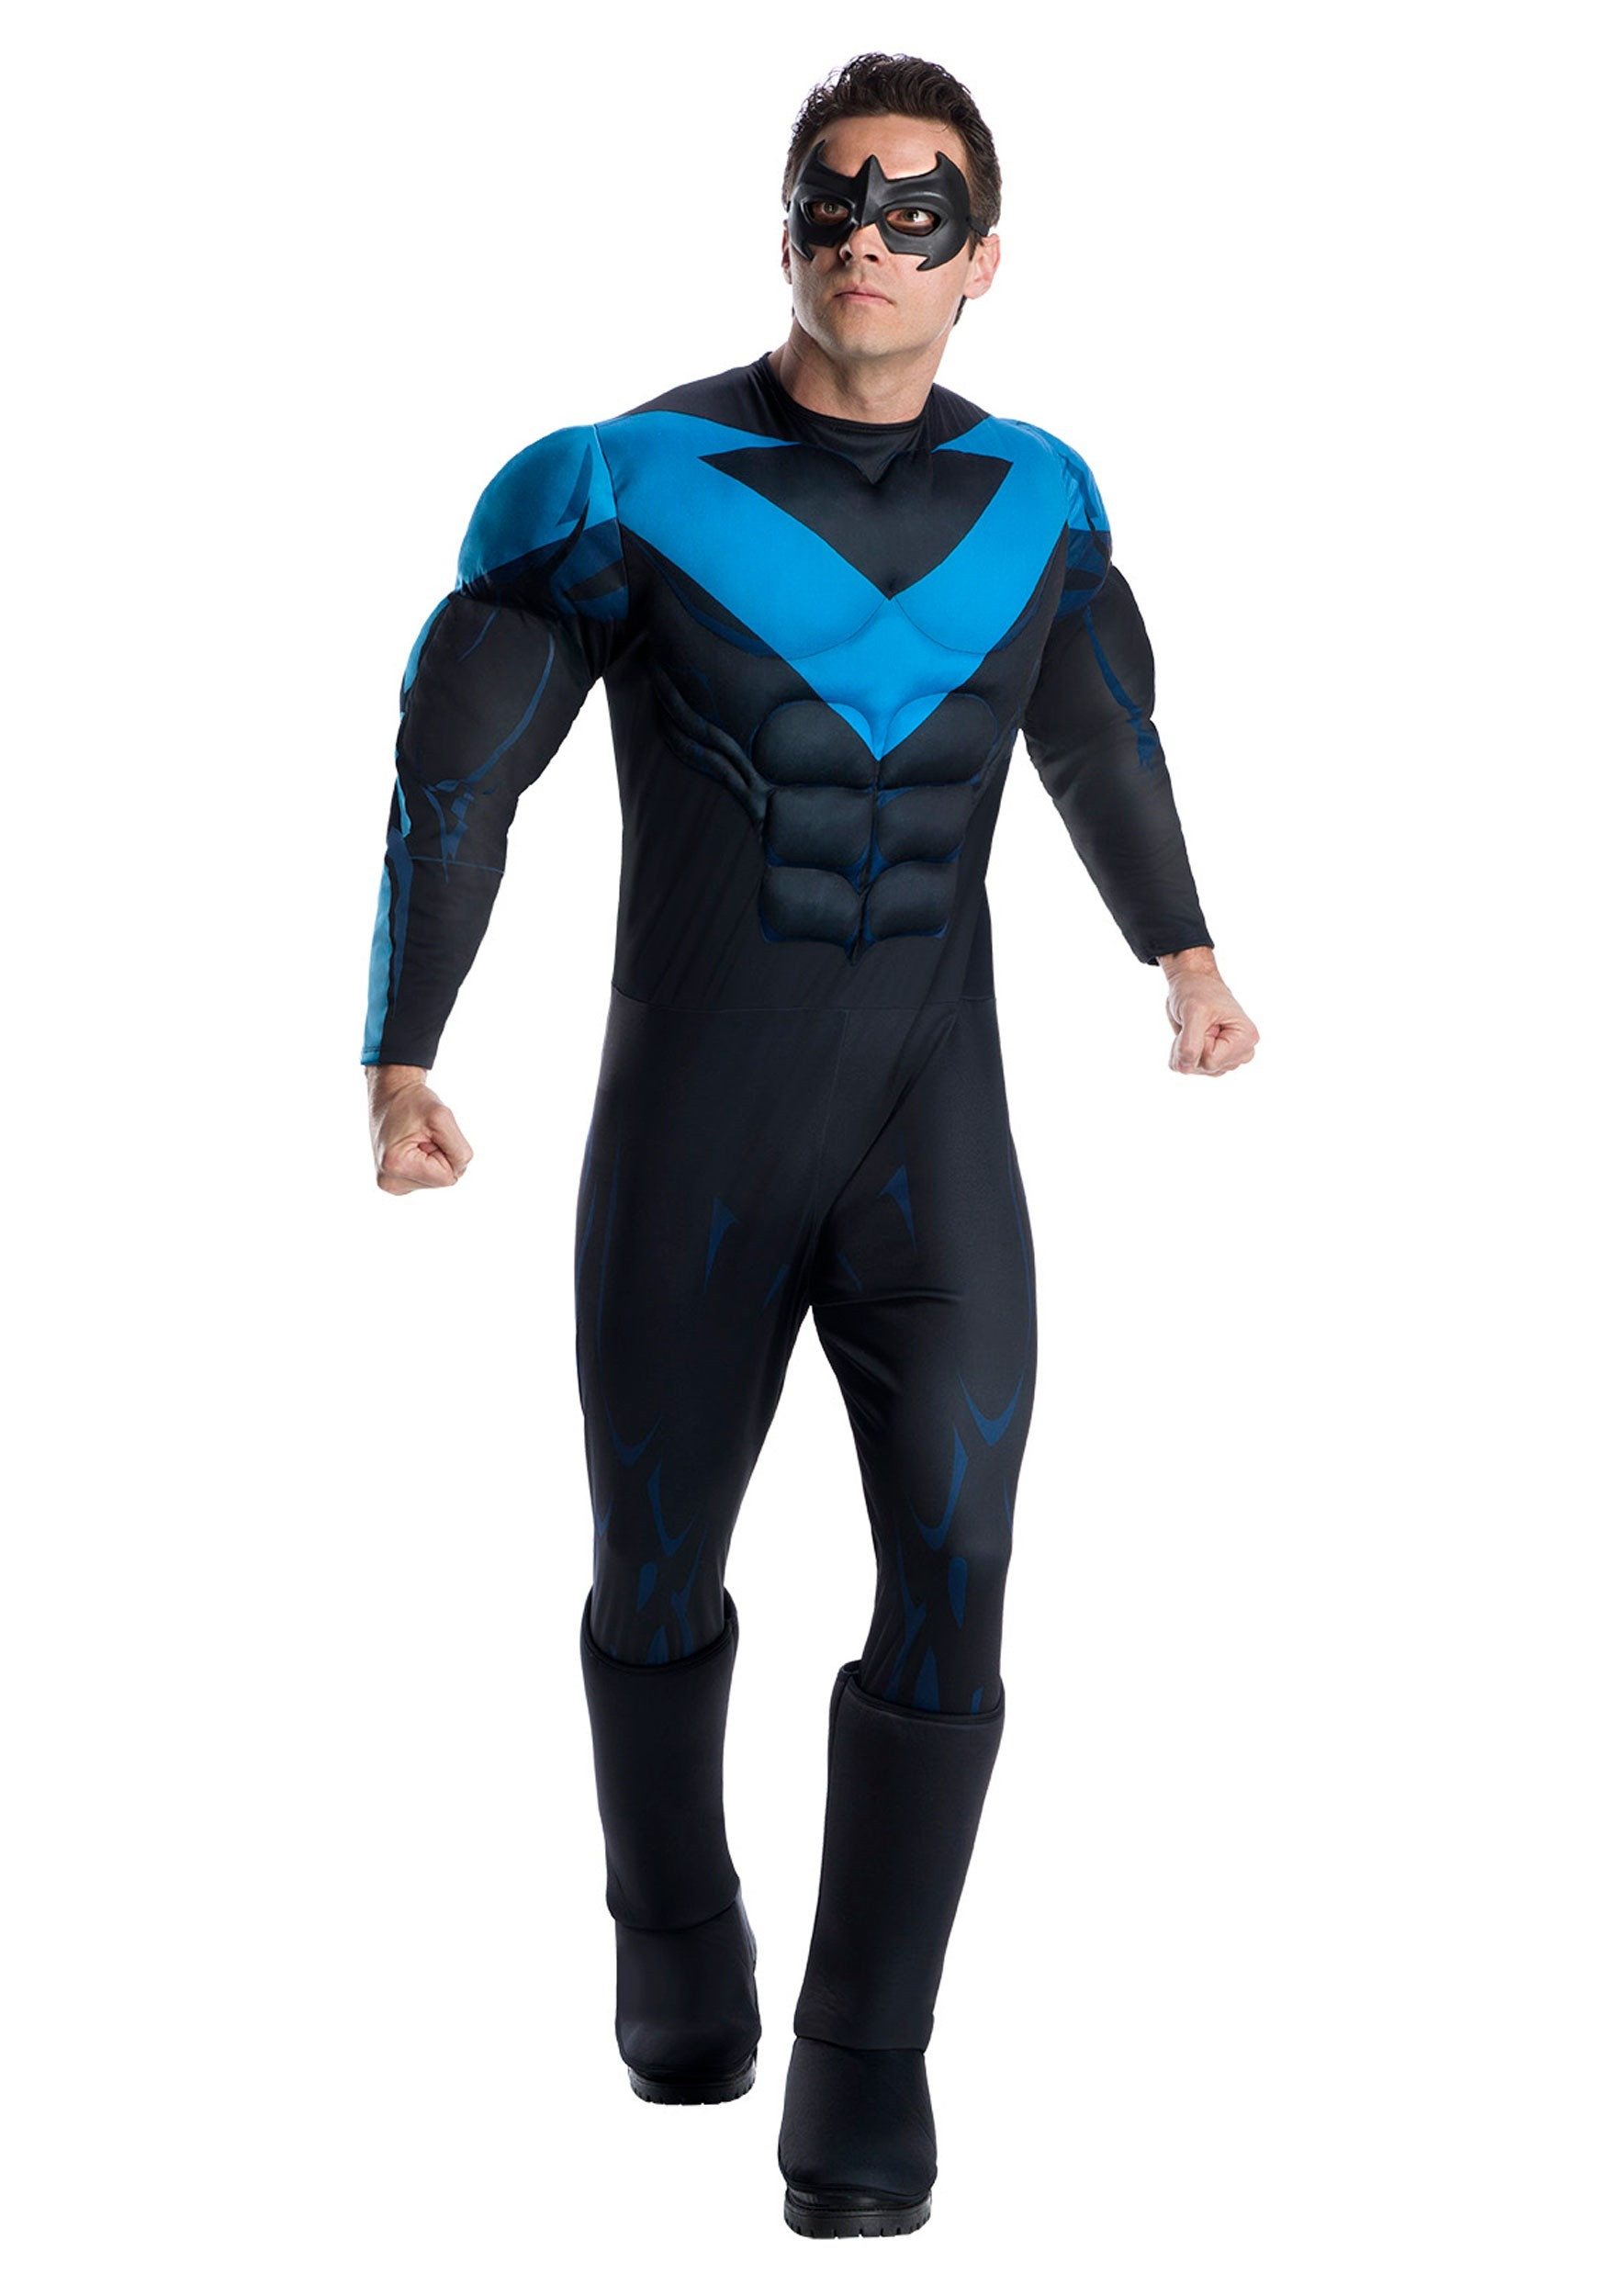 Nightwing Costume DIY
 Deluxe Nightwing Costume for Men